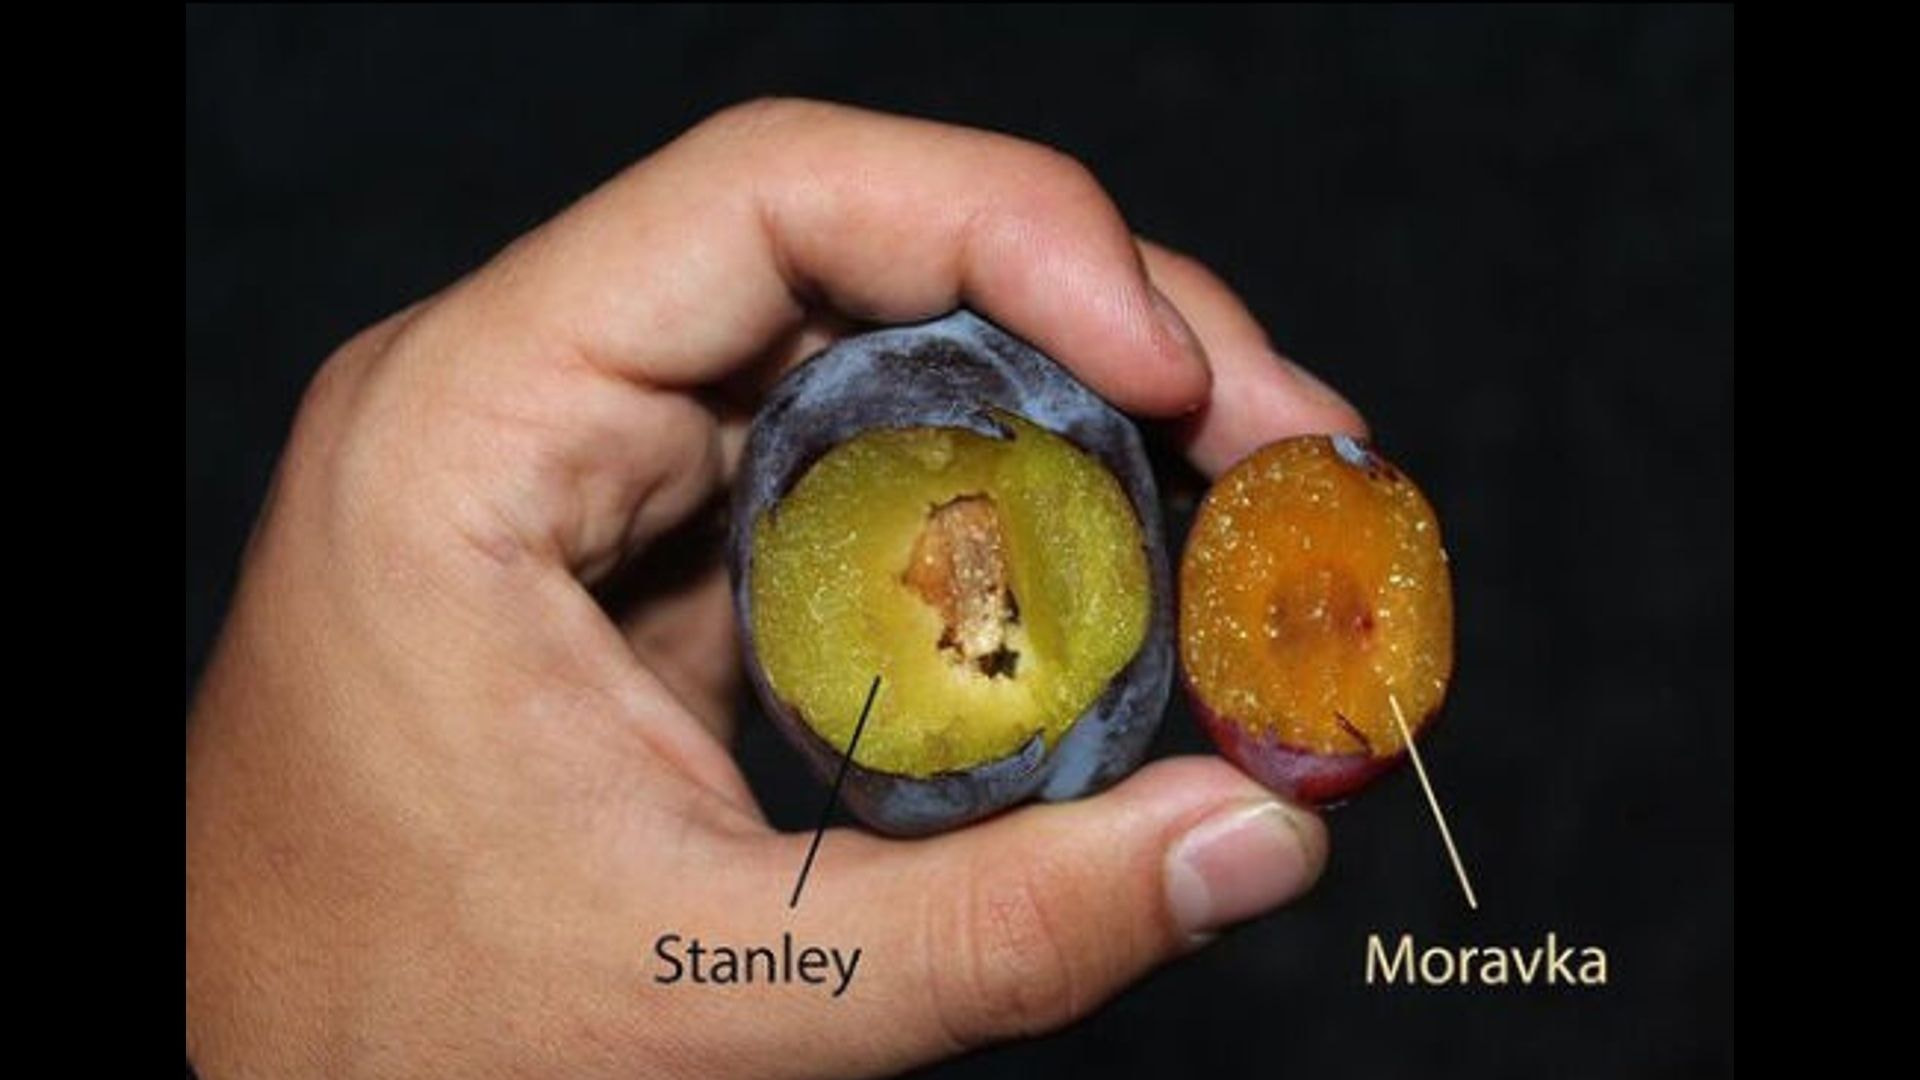 hand-holds-plums-stanley-and-moravka